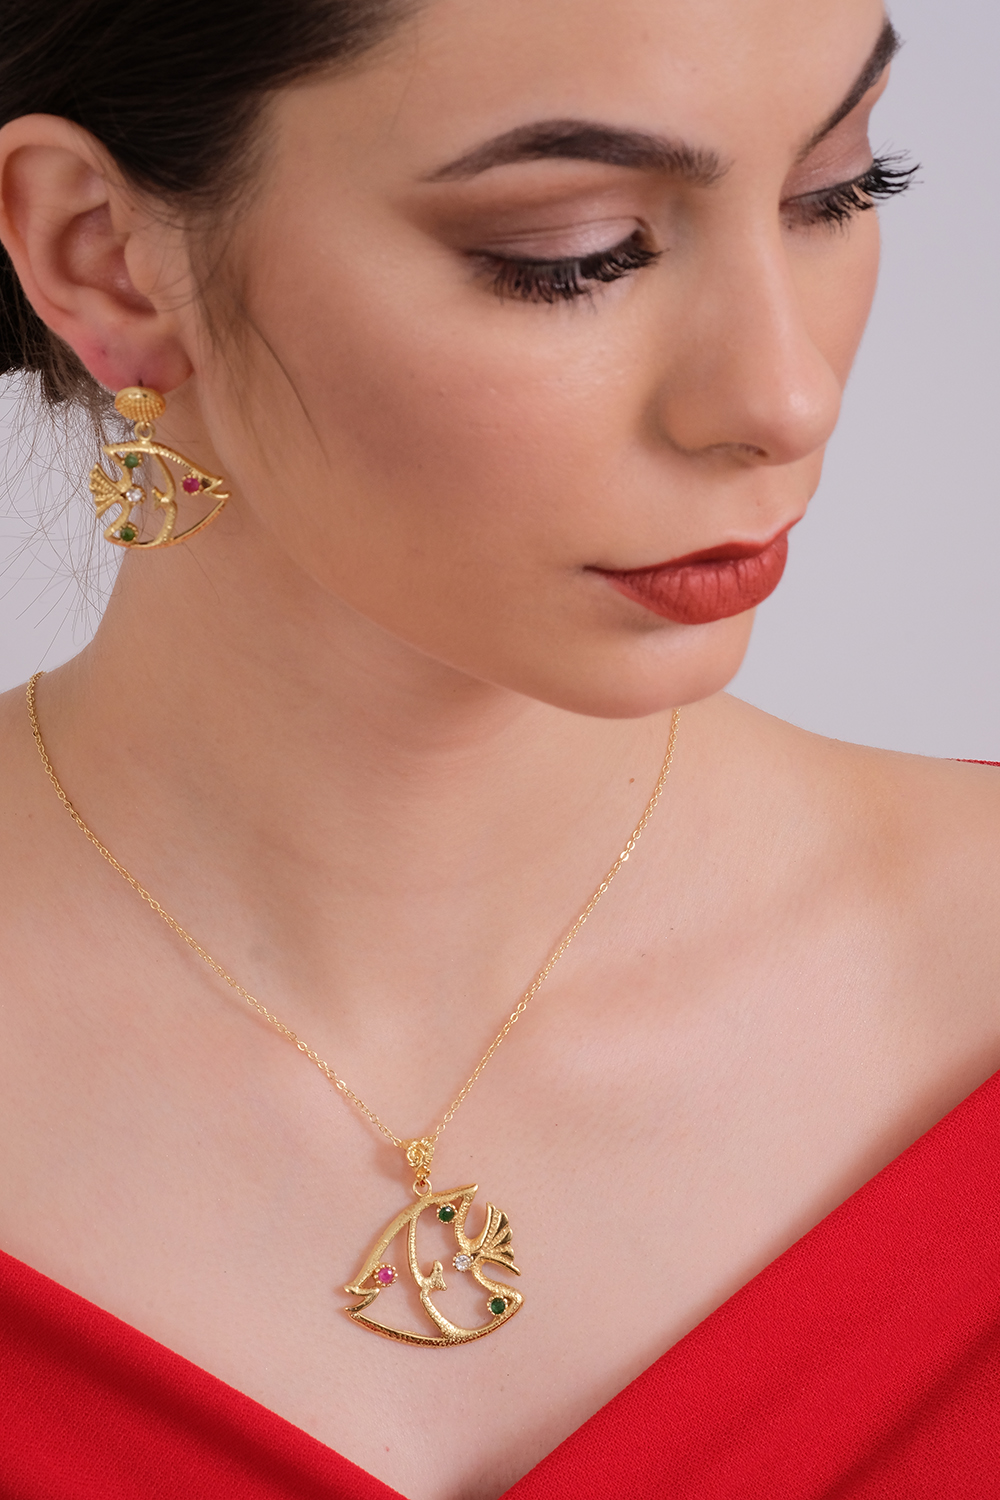 PAEON Necklace and Earrings Gold Plated Jewelry Set